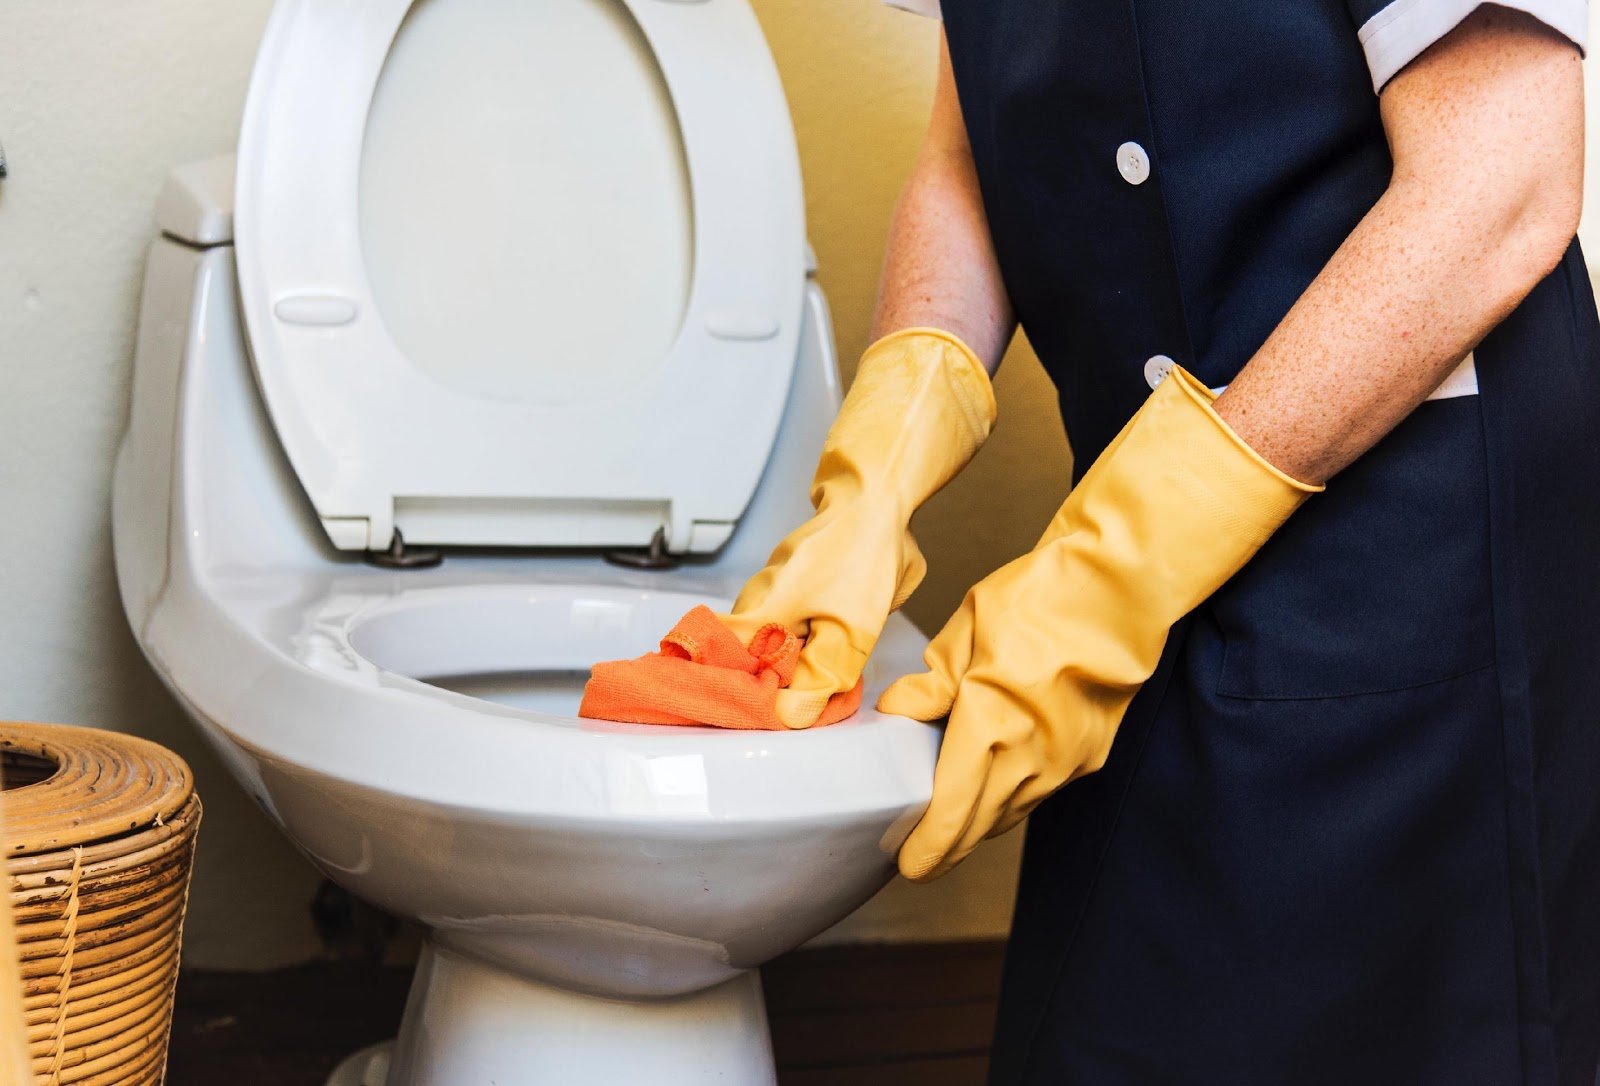 MOST EFFECTIVE TOILET CLEANING SOLUTIONS